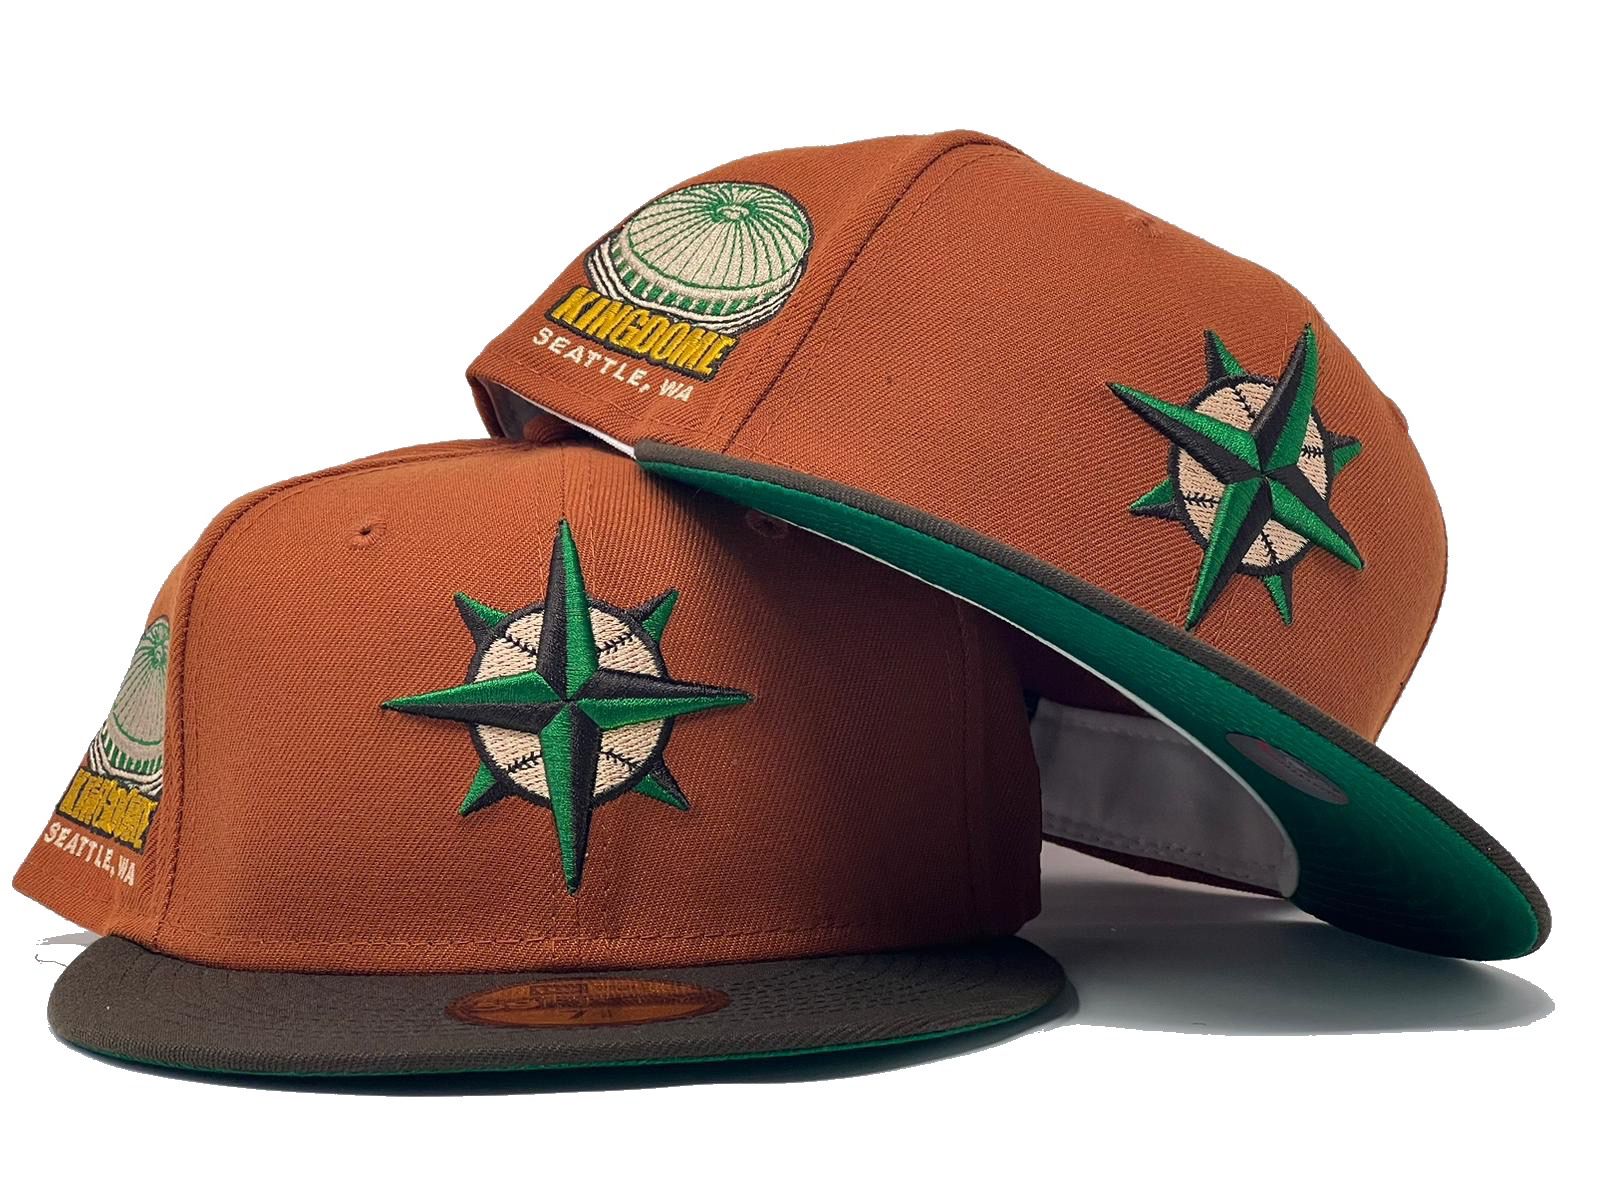 Portland Timbers New Era Kick Off 59FIFTY Fitted Hat - Green